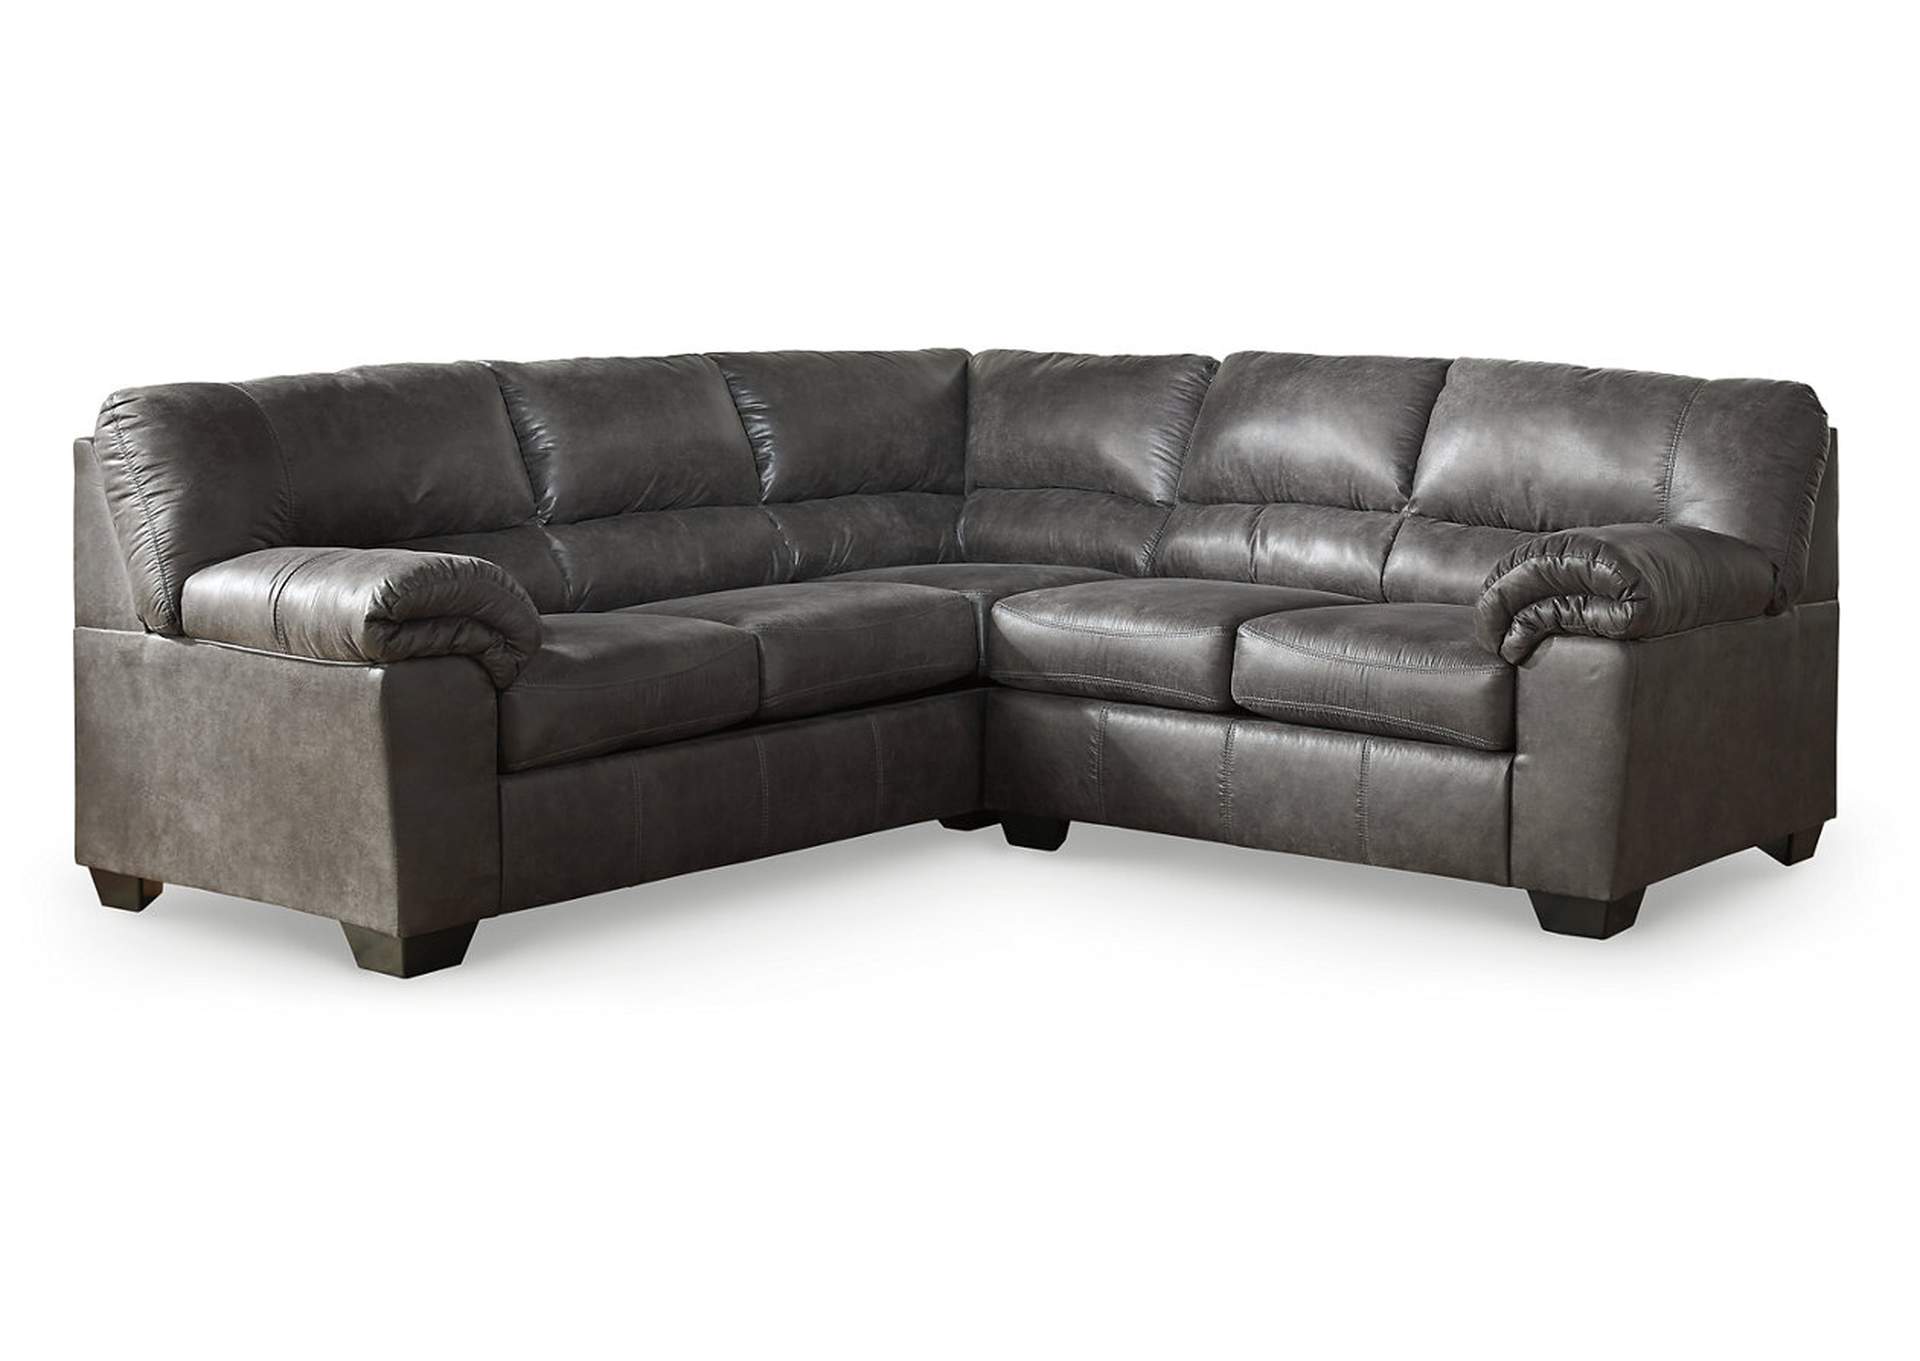 Bladen 2-Piece Sectional,Signature Design By Ashley